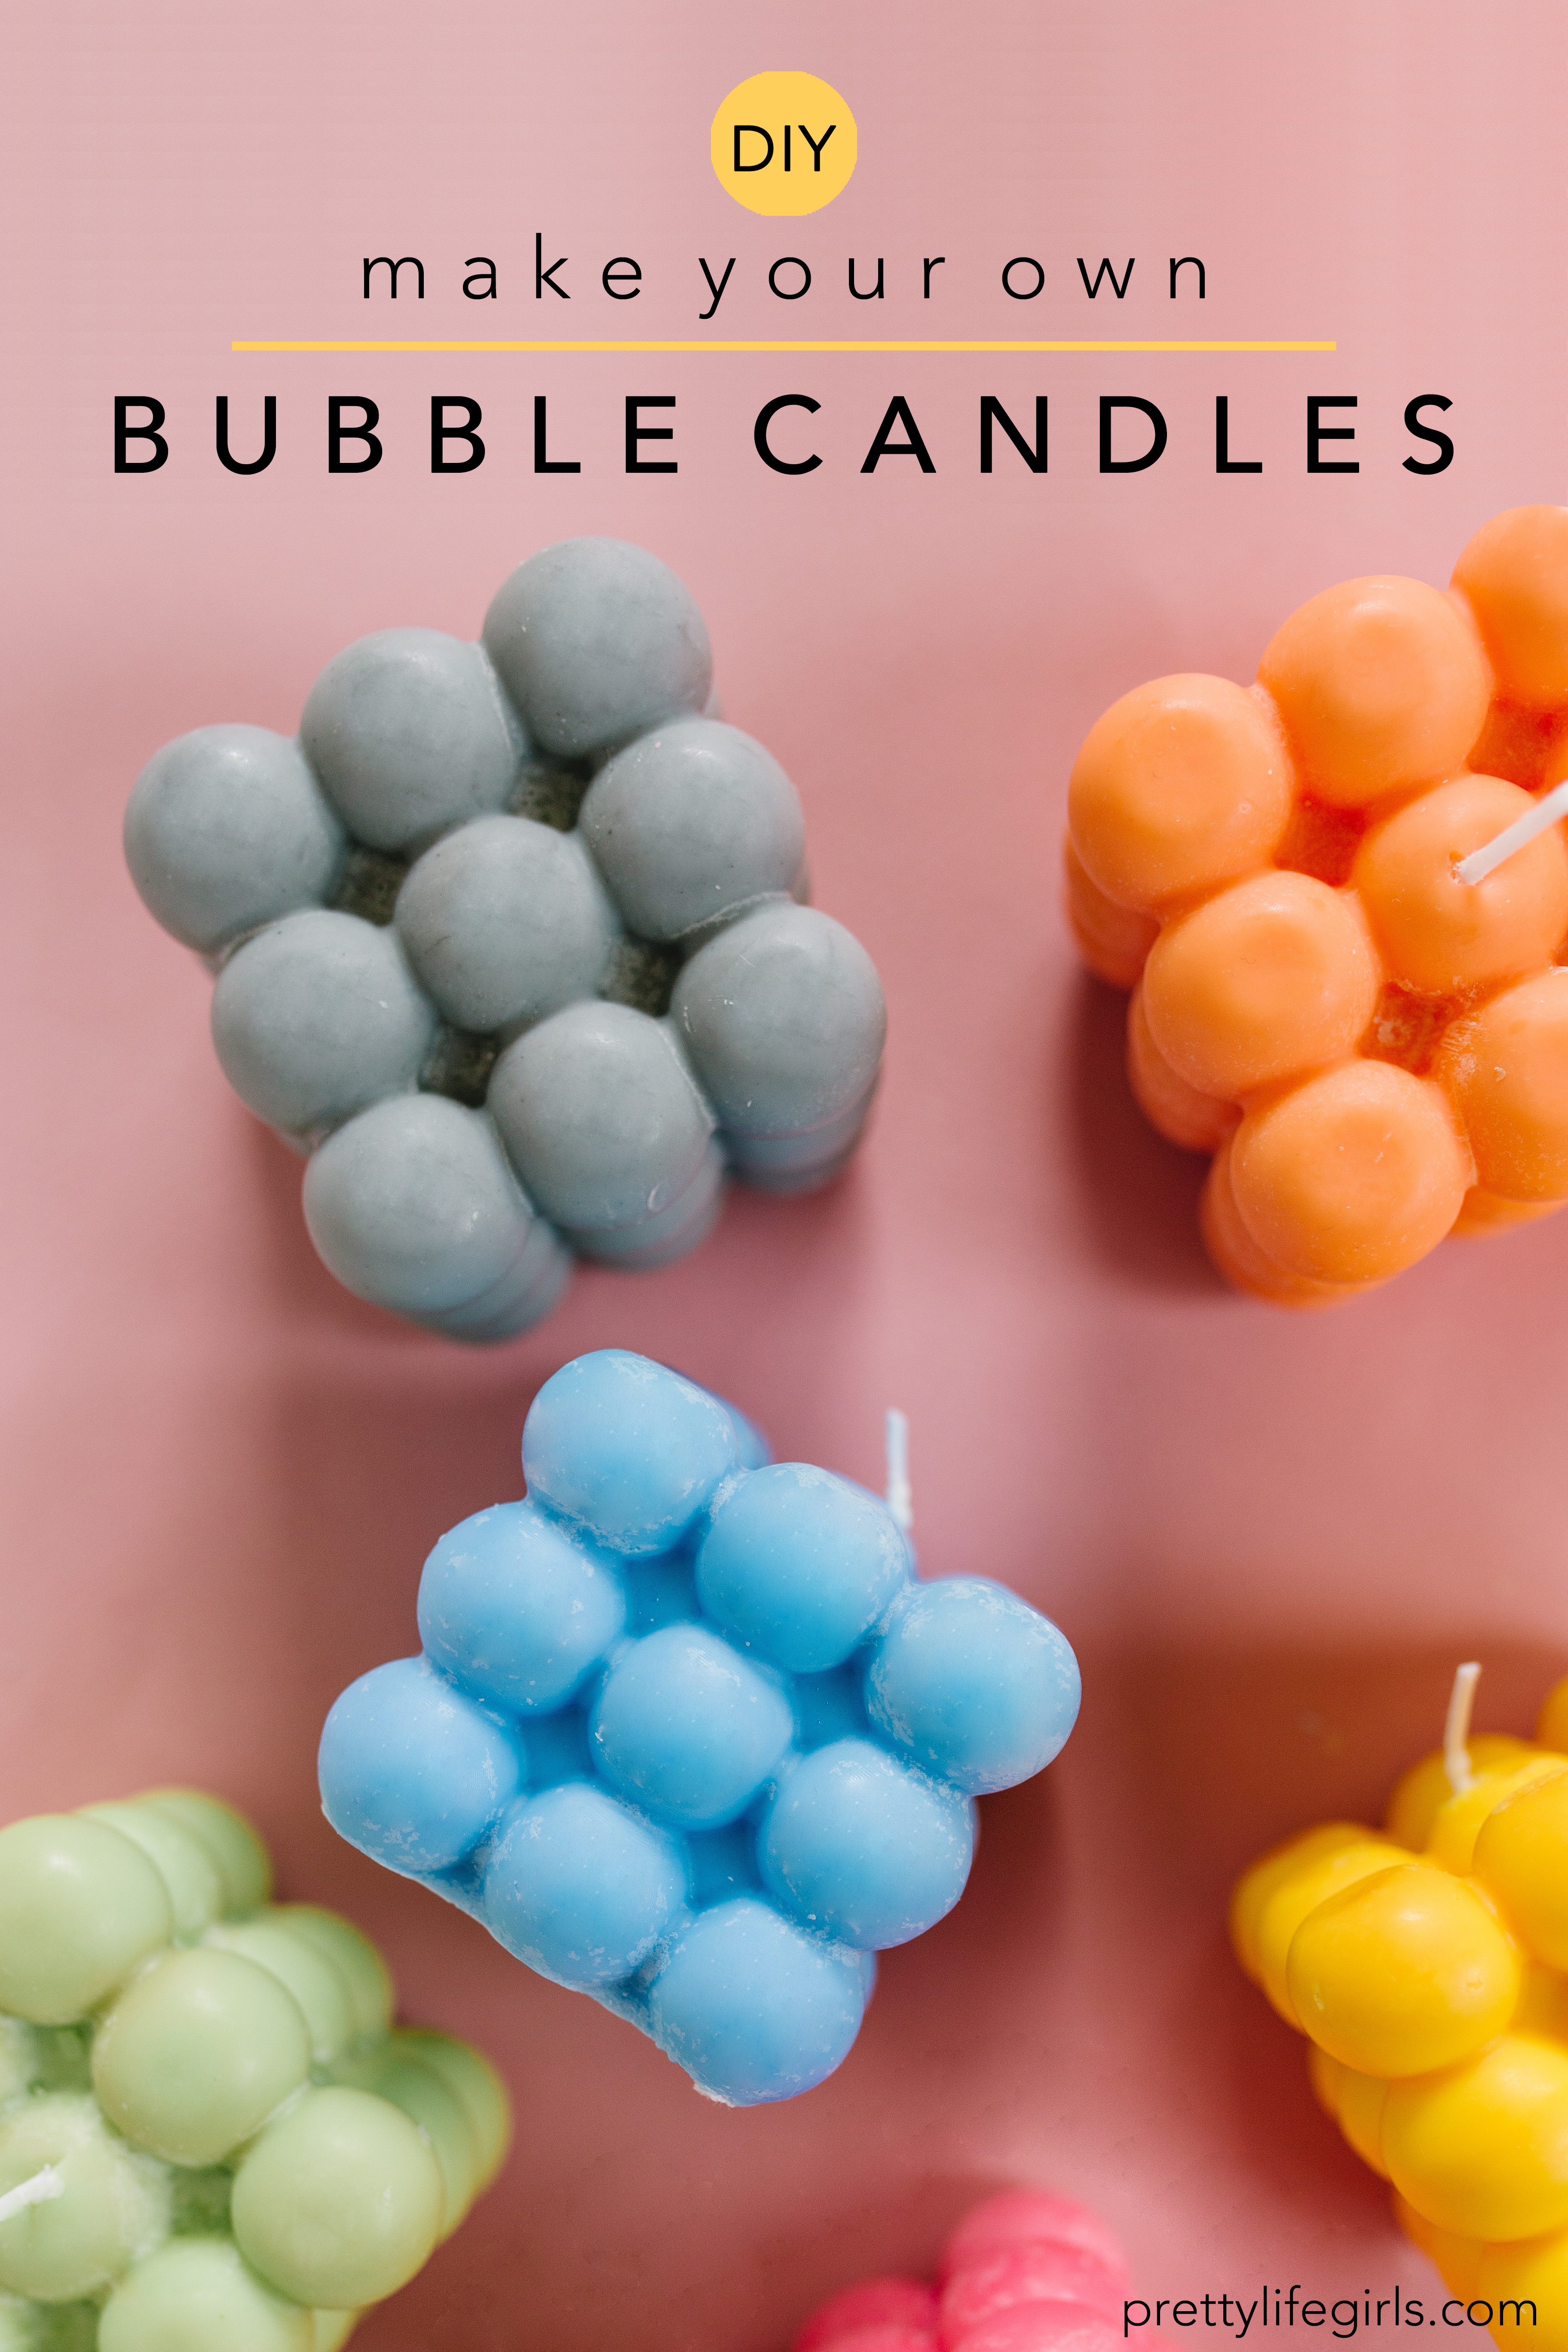 DIY Bubble Candle Tutorial + a tutorial featured by Top US Craft Blog + The Pretty Life Girls